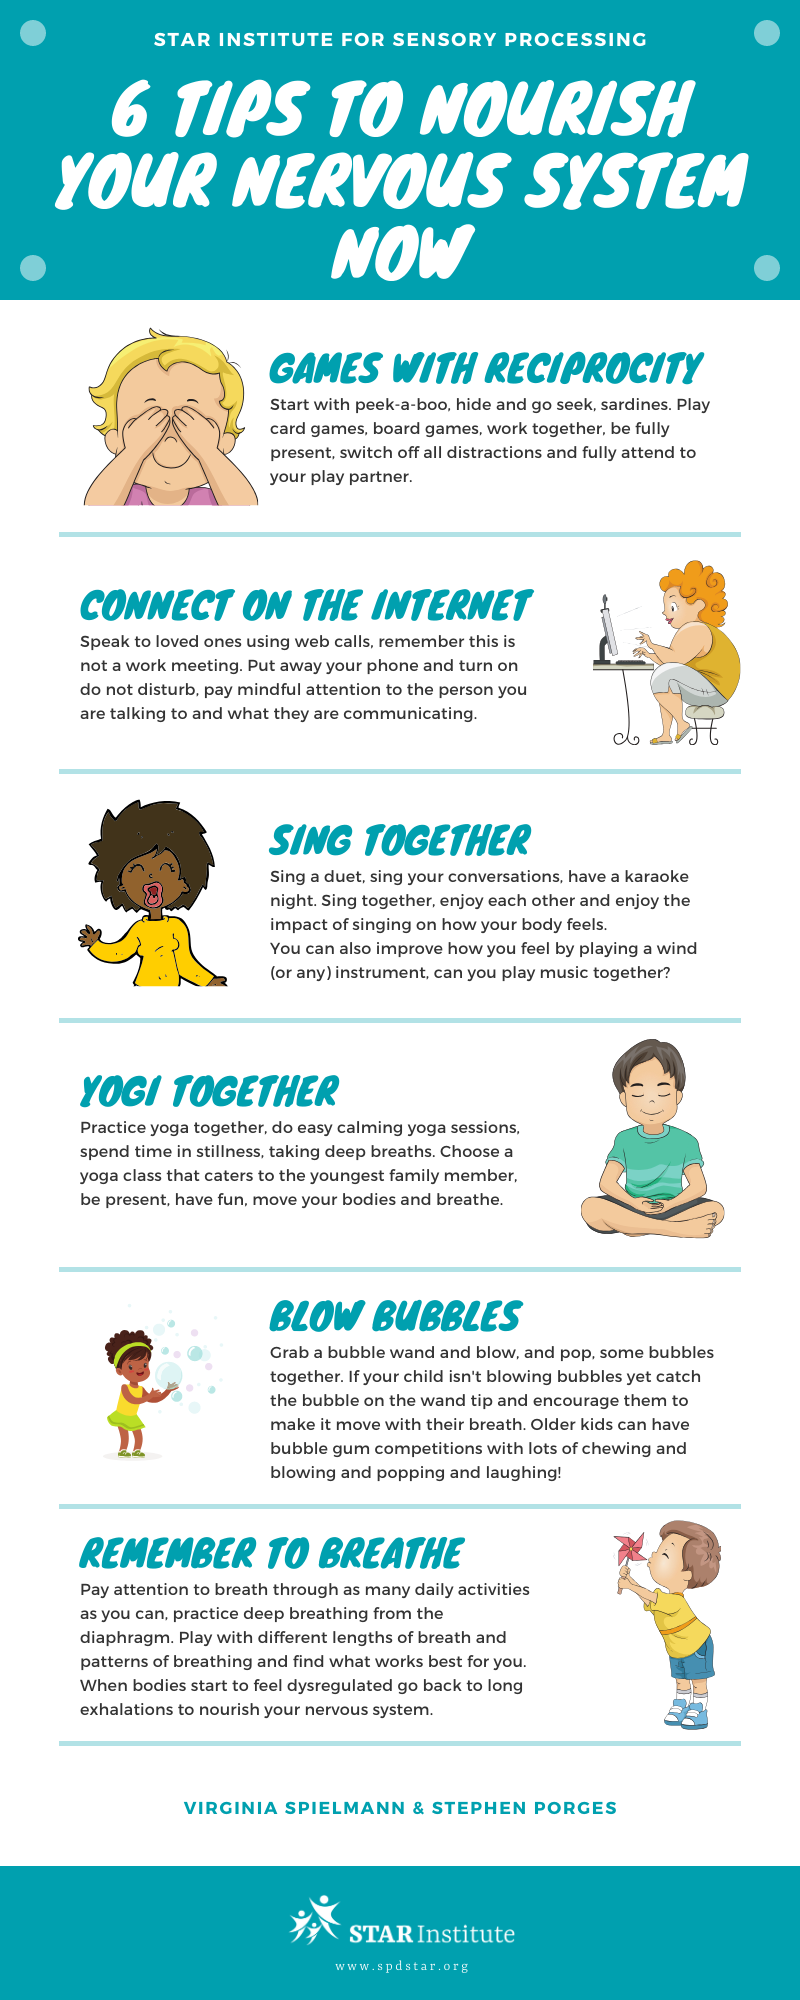 An infographic of six tips to nourish your nervous system now - games, internet calls, singing, yoga, bubbles and breathing. 6 cartoons illustrate each point. By Virginia Spielmann and Stephen Porges